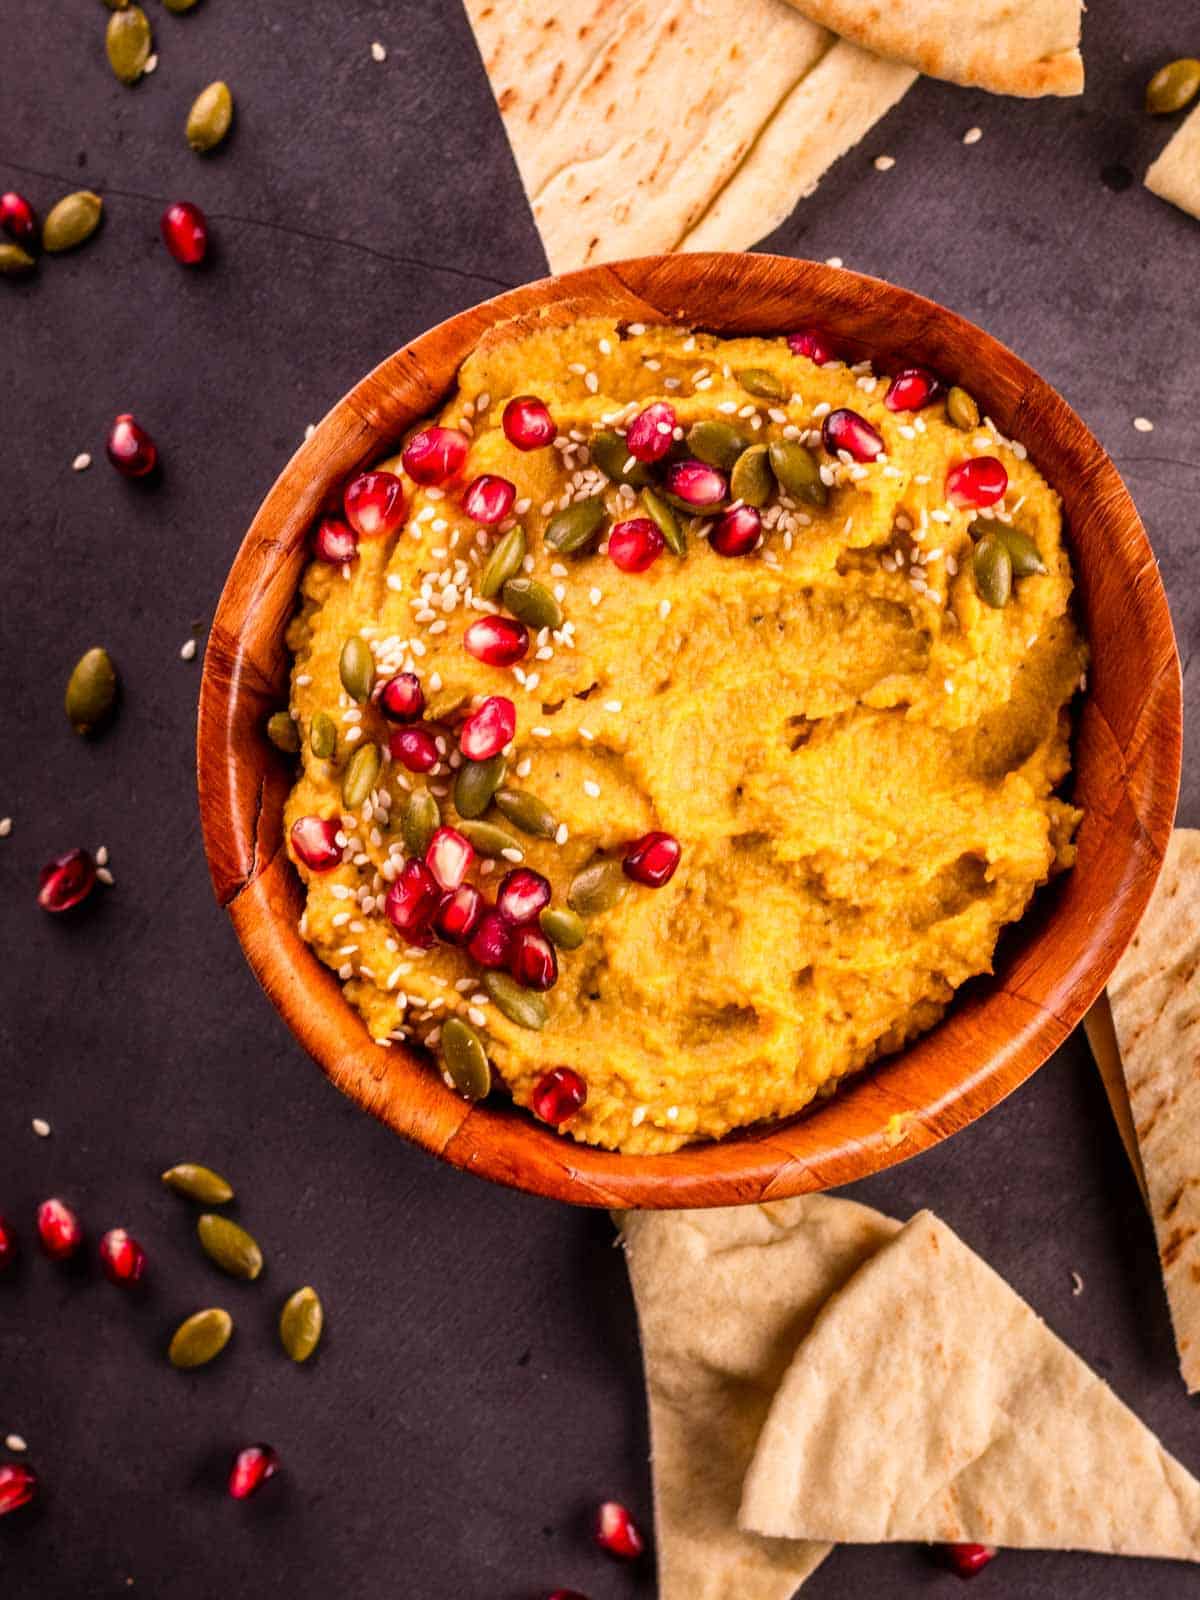 pumpkin hummus topped with pepitas, sesame seeds and pomegranate seeds with pita pieces next to it